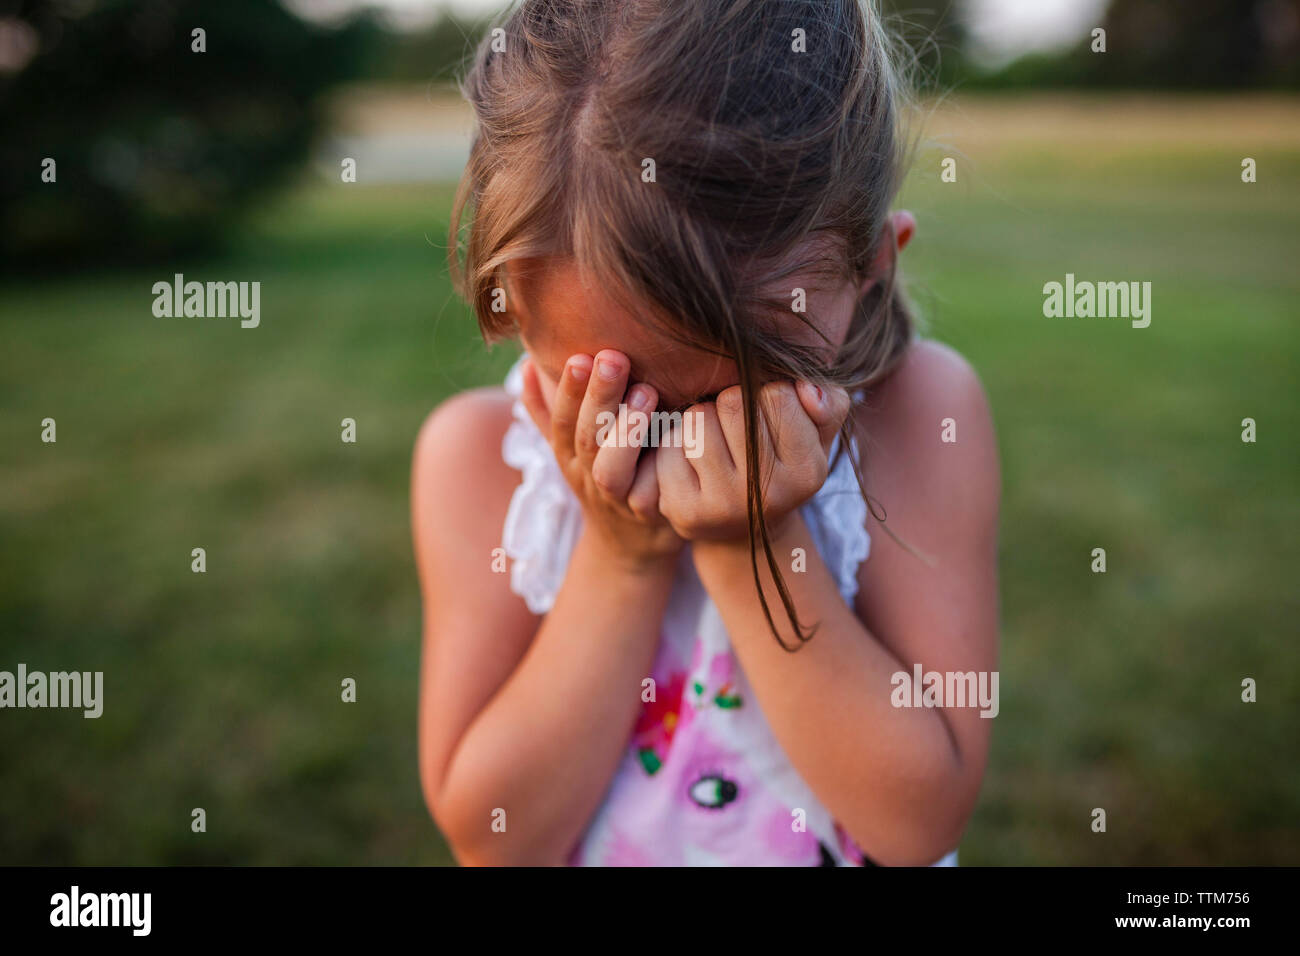 Close-up of girl covering face while crying outdoors Stock Photo